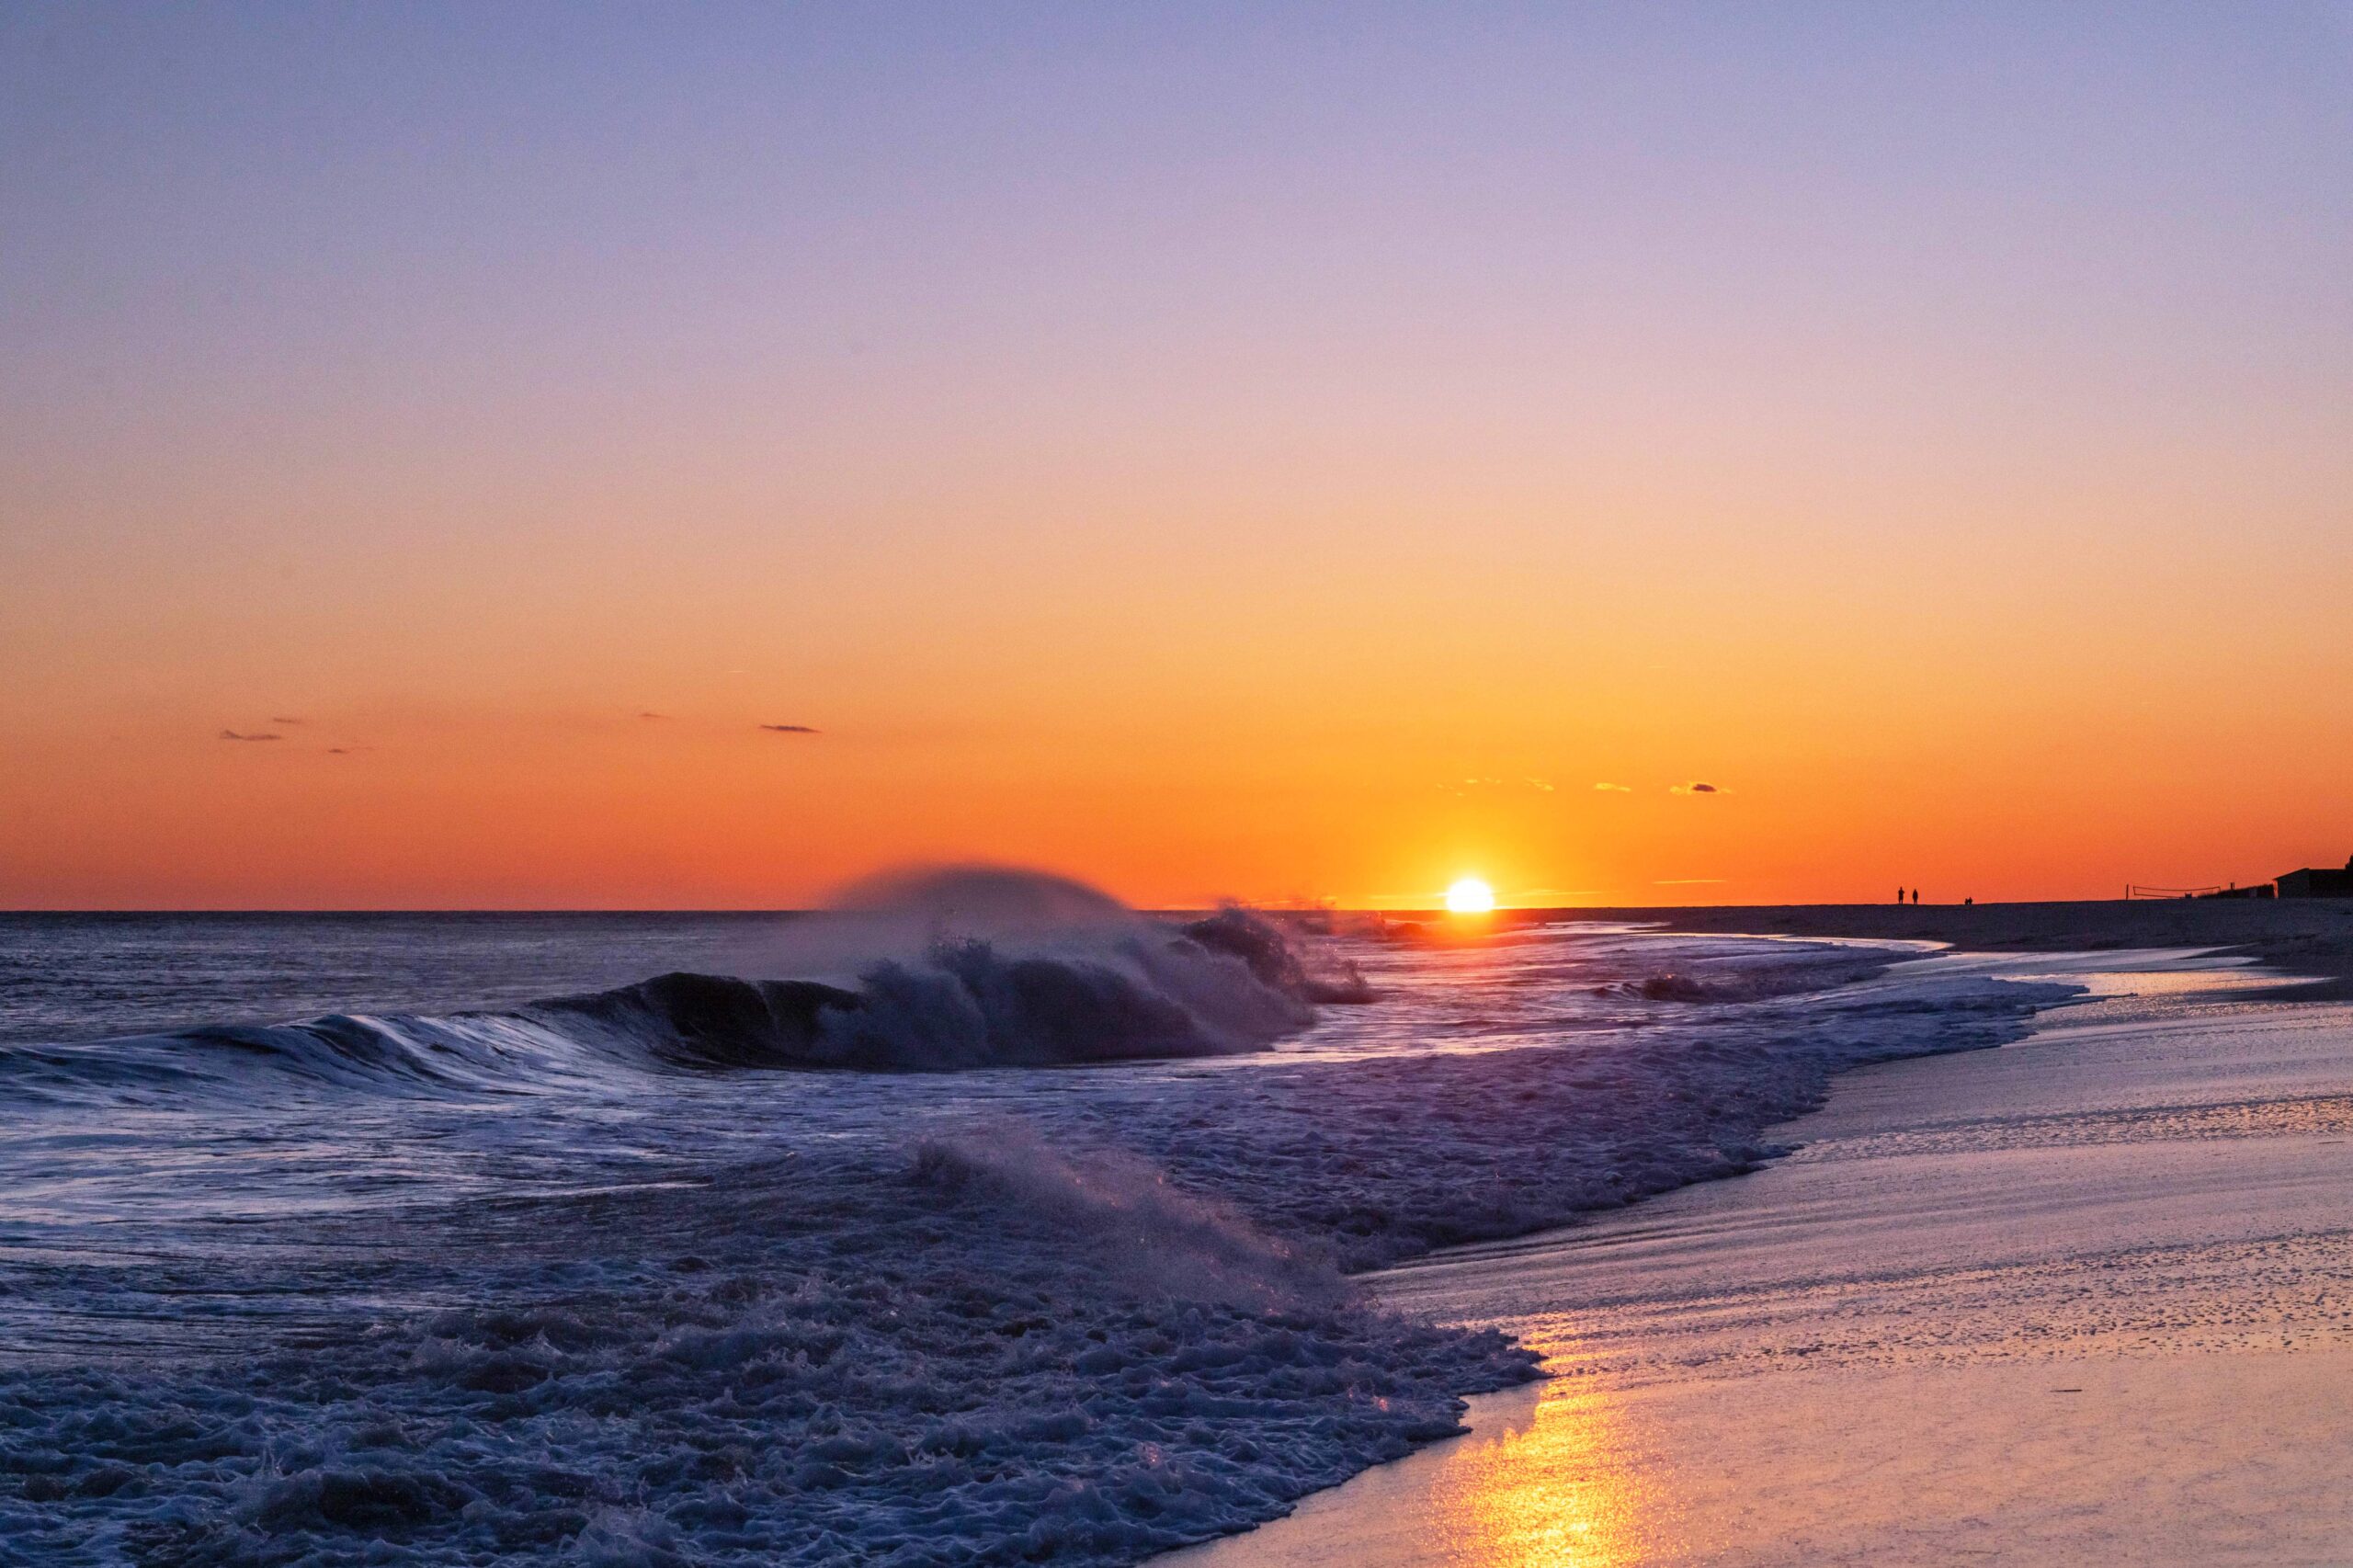 A wave crashing with ocean spray as the sun sets in a clear blue and orange sky